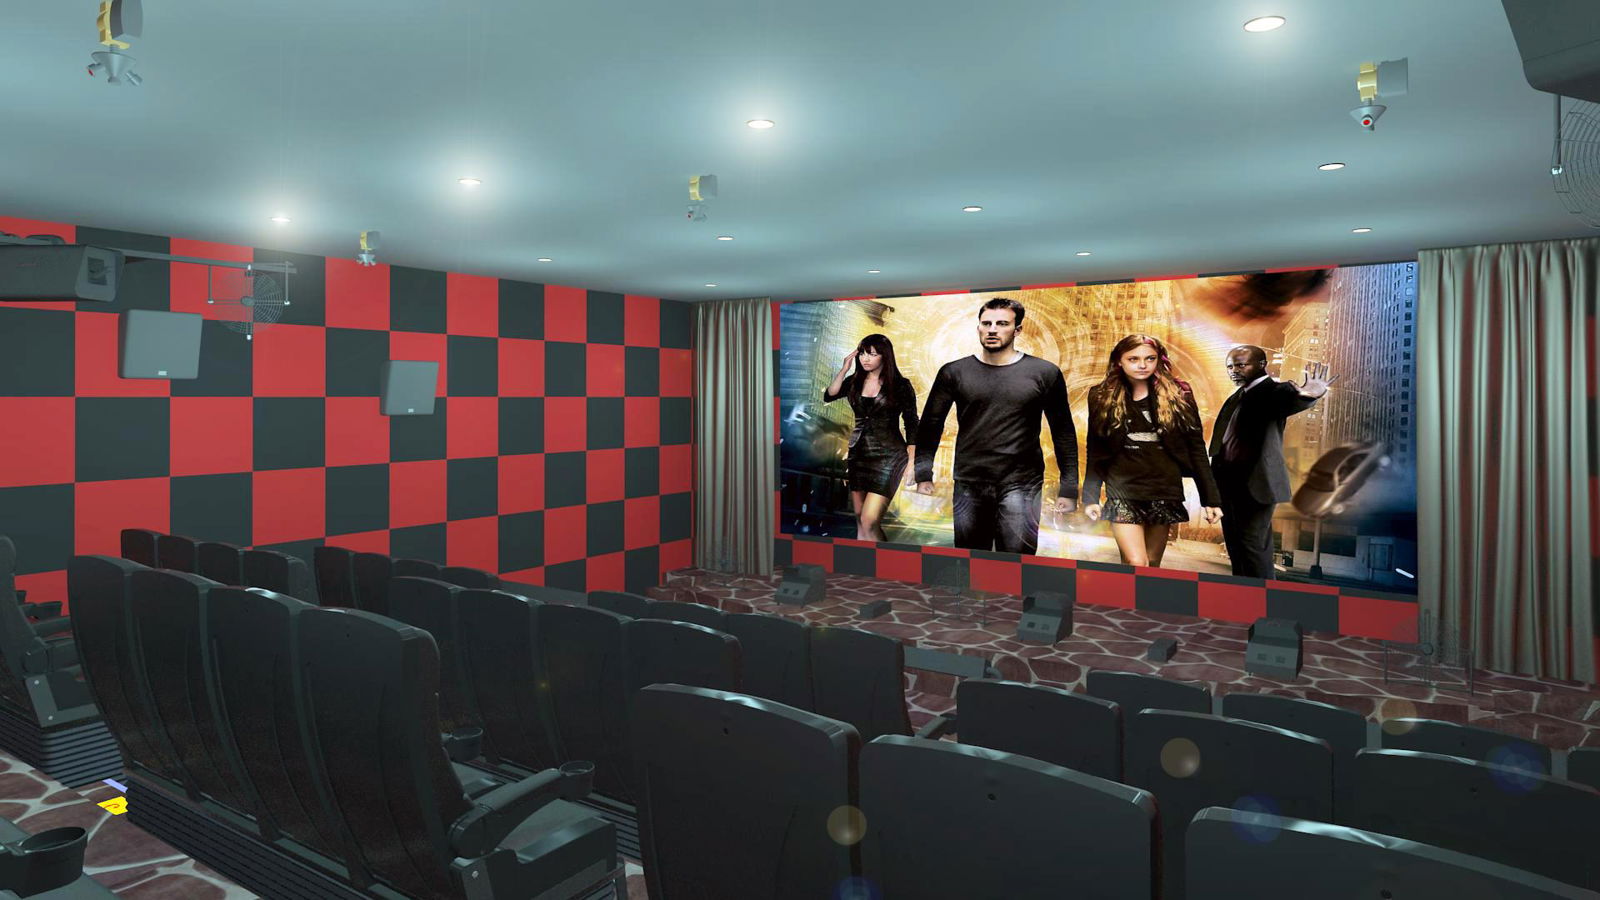 5 Seats / 4D Cinema System，Luxury Motion Seats With Spray Air And Vibration